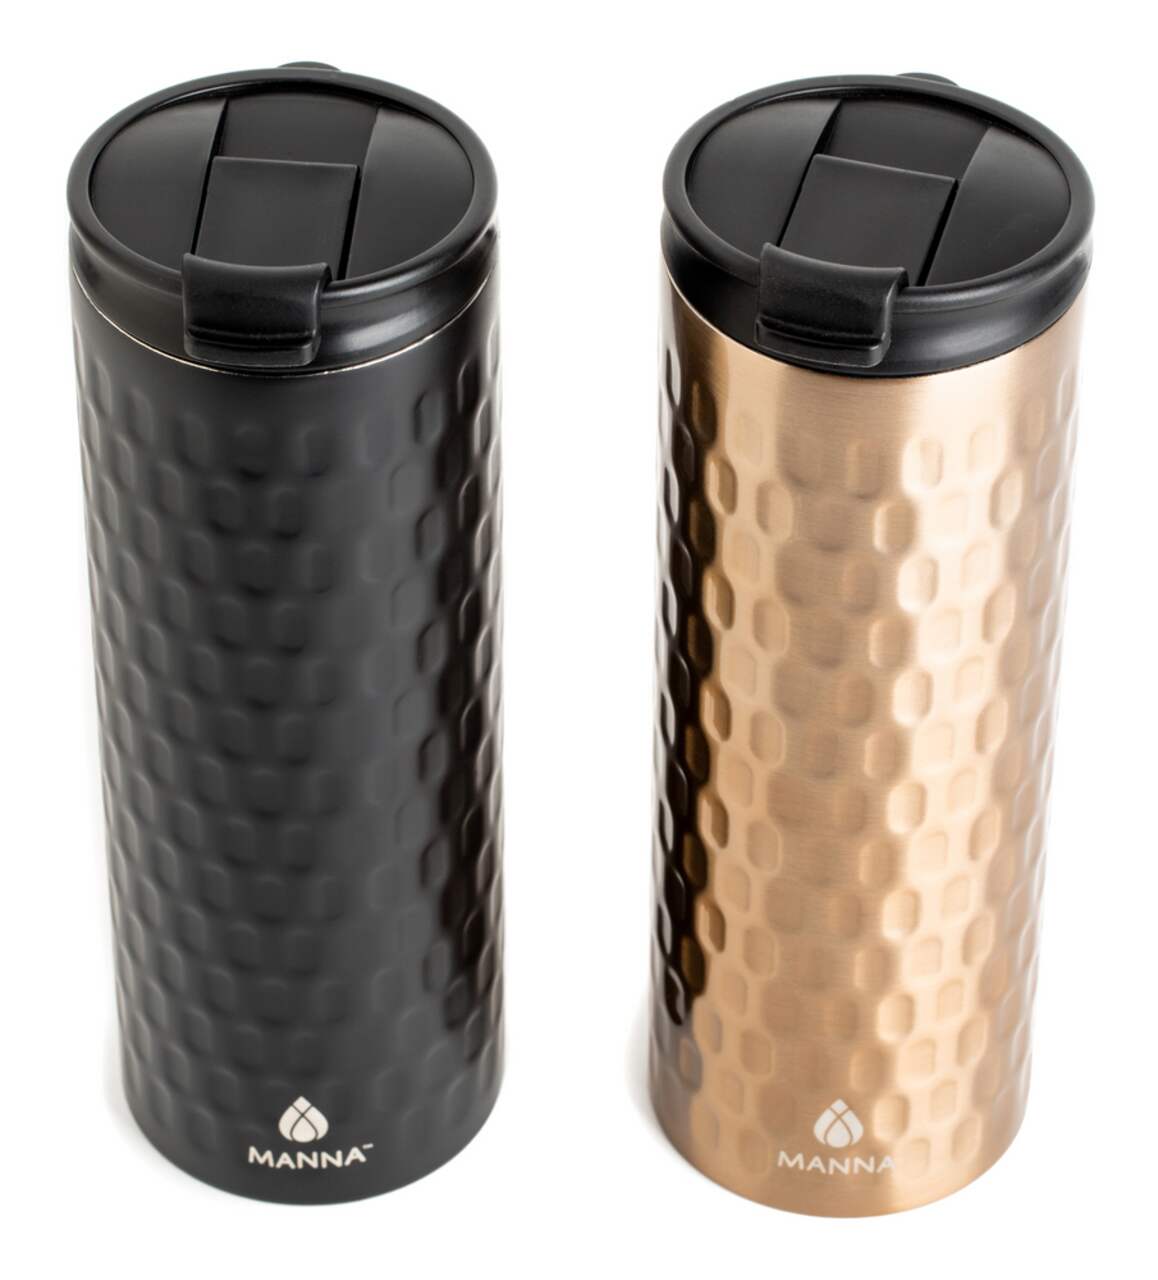 https://media-www.canadiantire.ca/product/living/kitchen/food-storage/3993521/manna-quilted-travel-mug-2-pack-09652b6f-55ec-47bd-a8f5-22114272b6ac.png?imdensity=1&imwidth=1244&impolicy=mZoom